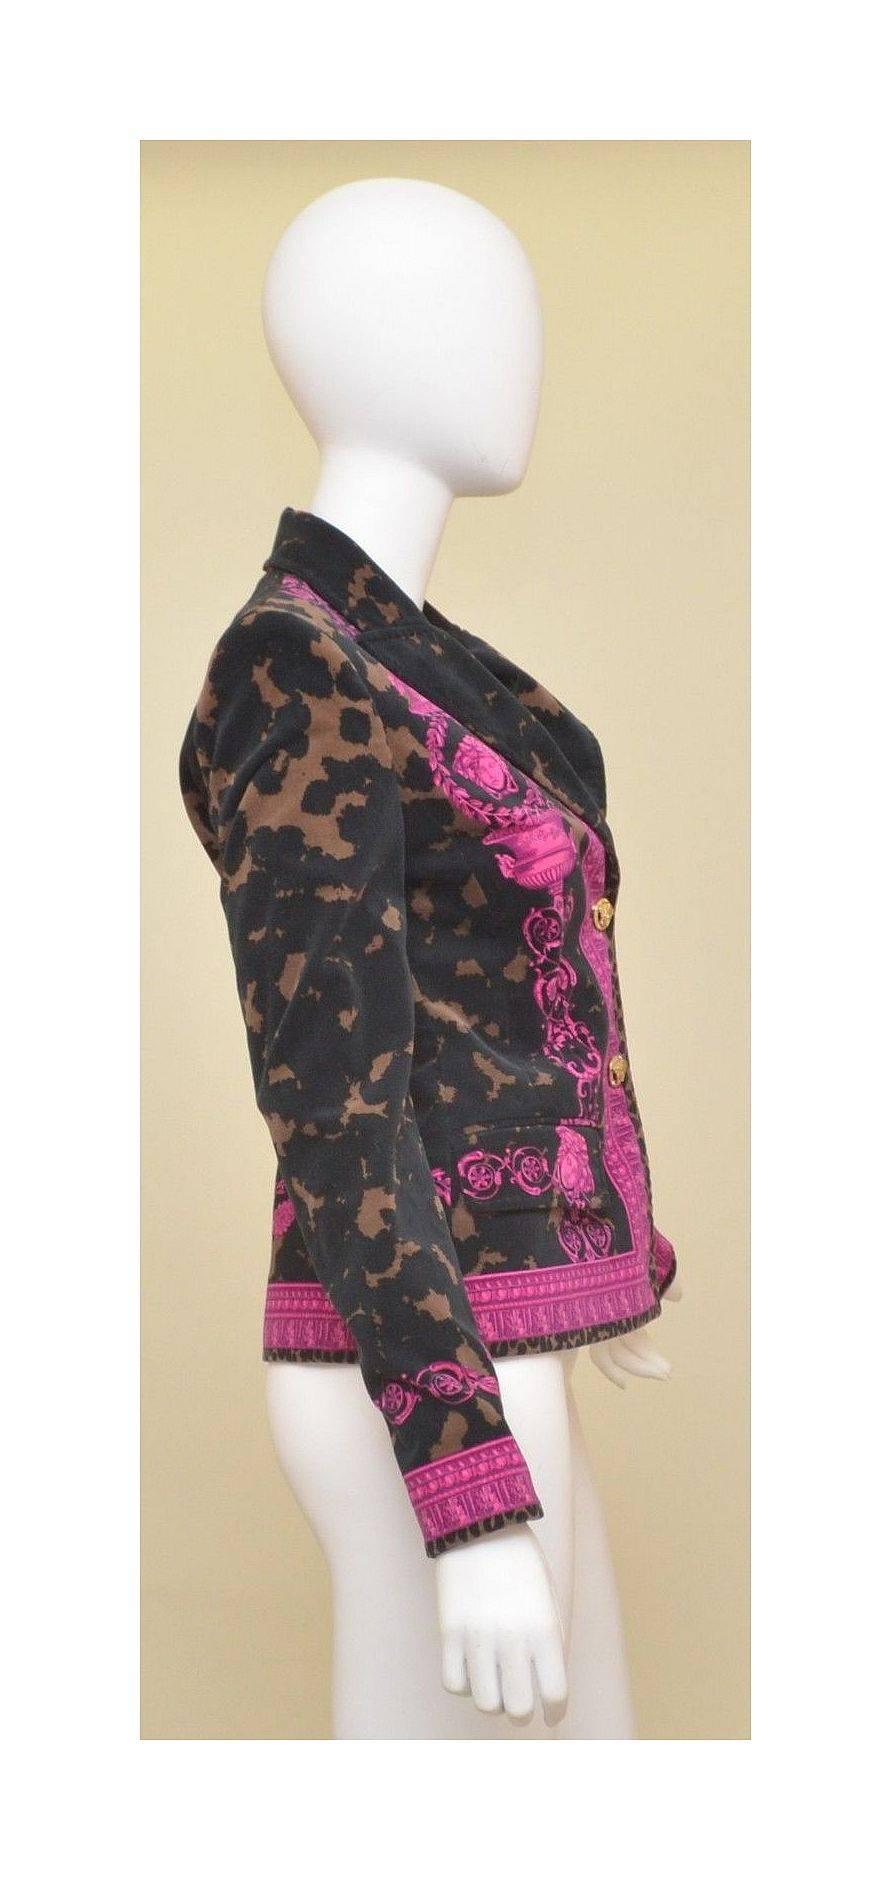 Versace Jacket is an Italian size 42, US 8. Features black, brown, and fuchsia velvet, gold-tone Medusa head button closures, Medusa print throughout, and two front flap pockets. Jacket is fully lined and in EXCELLENT condition!

Measurements: